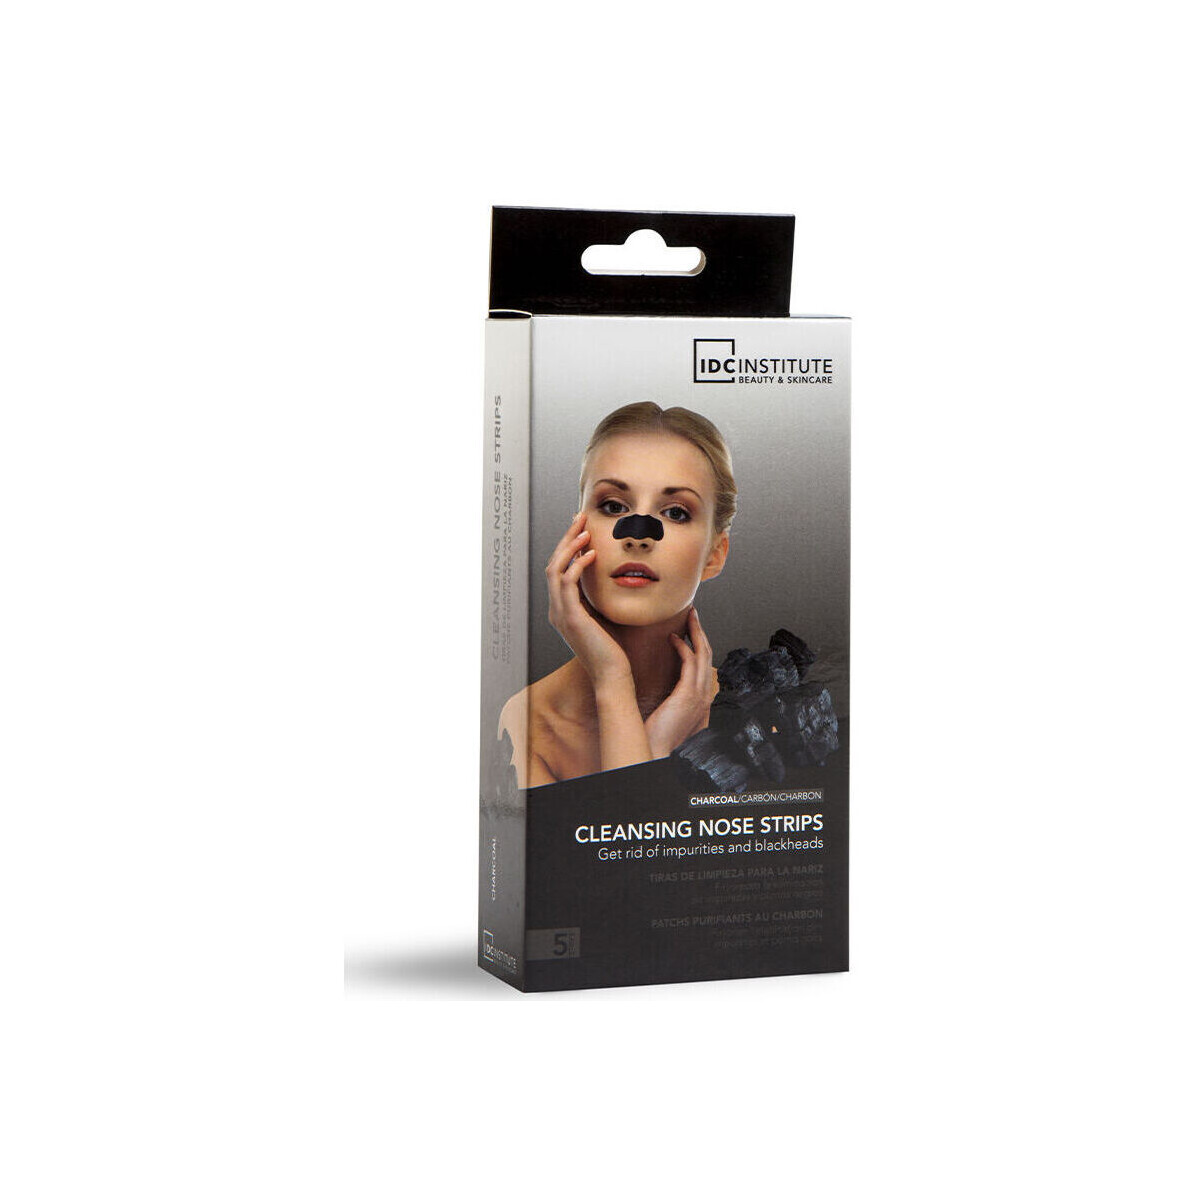 Bellezza Trattamento mirato Idc Institute Cleansing Nose Strips Charcoal Strips For Women 